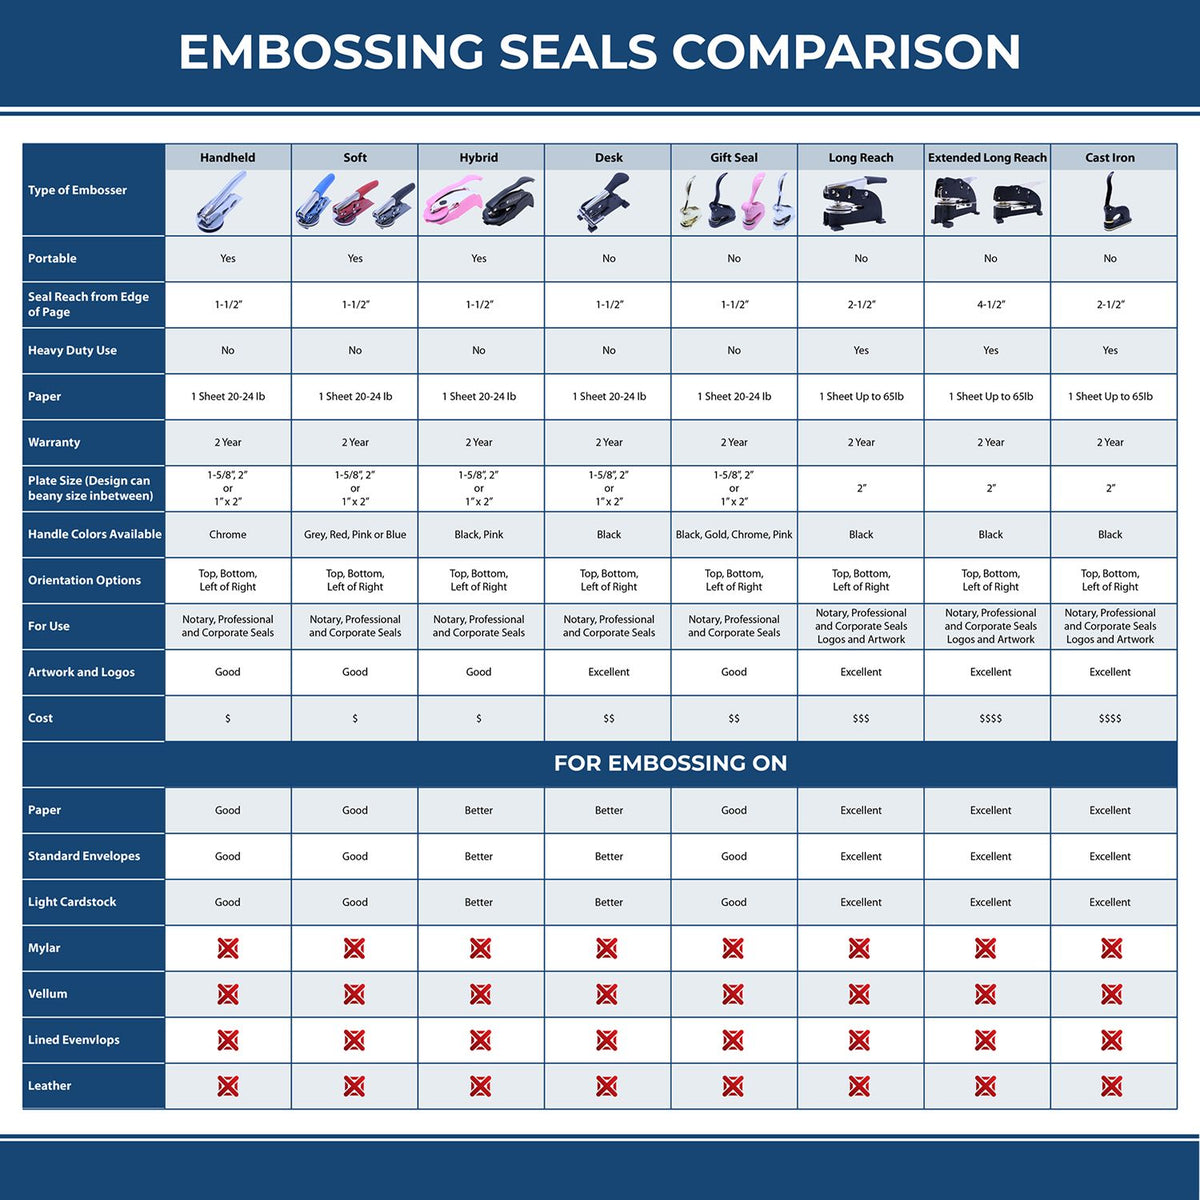 A comparison chart for the different types of mount models available for the Gift Alabama Architect Seal